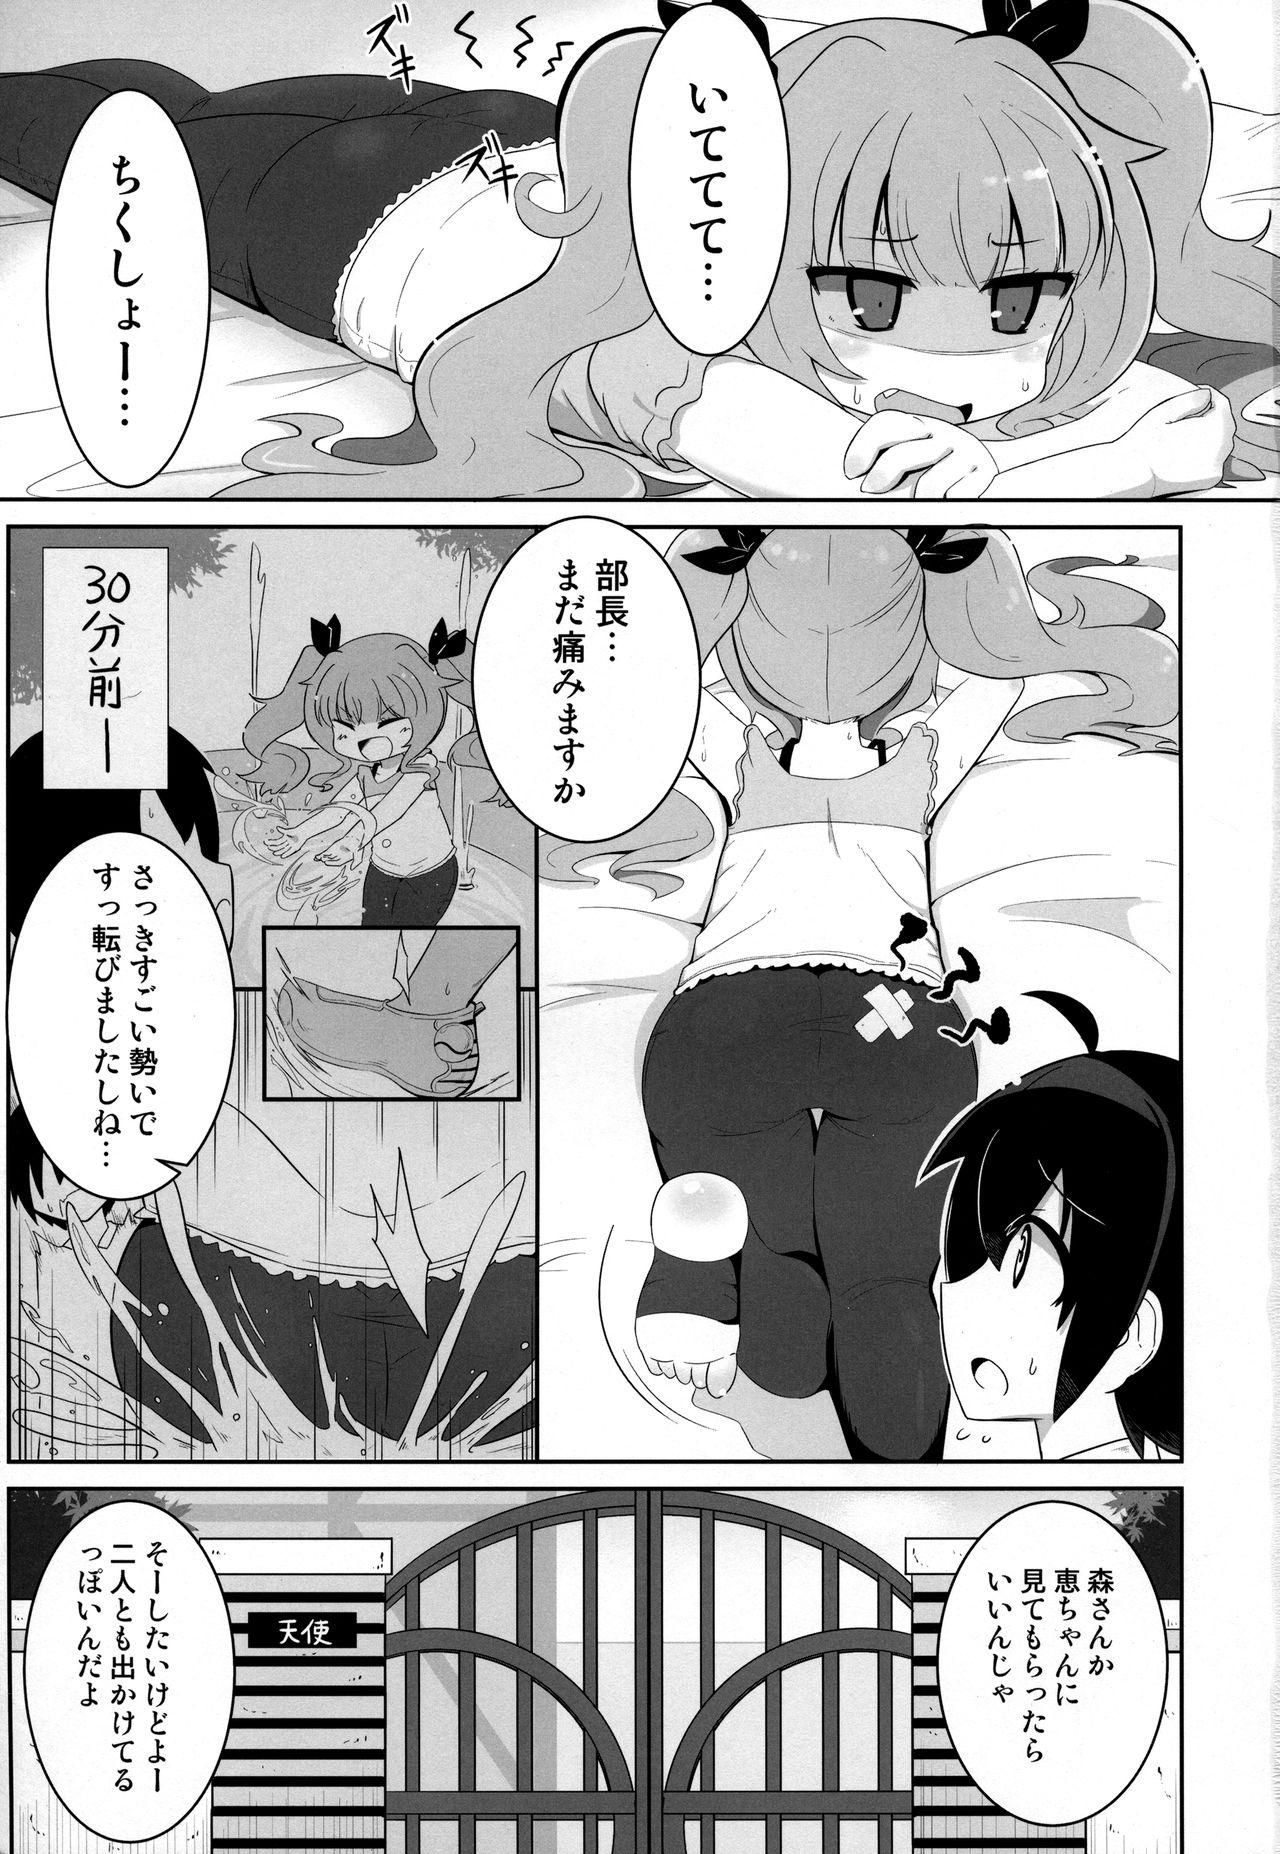 Scissoring Maa-chan Over!! - Gj bu Stepdaughter - Page 2